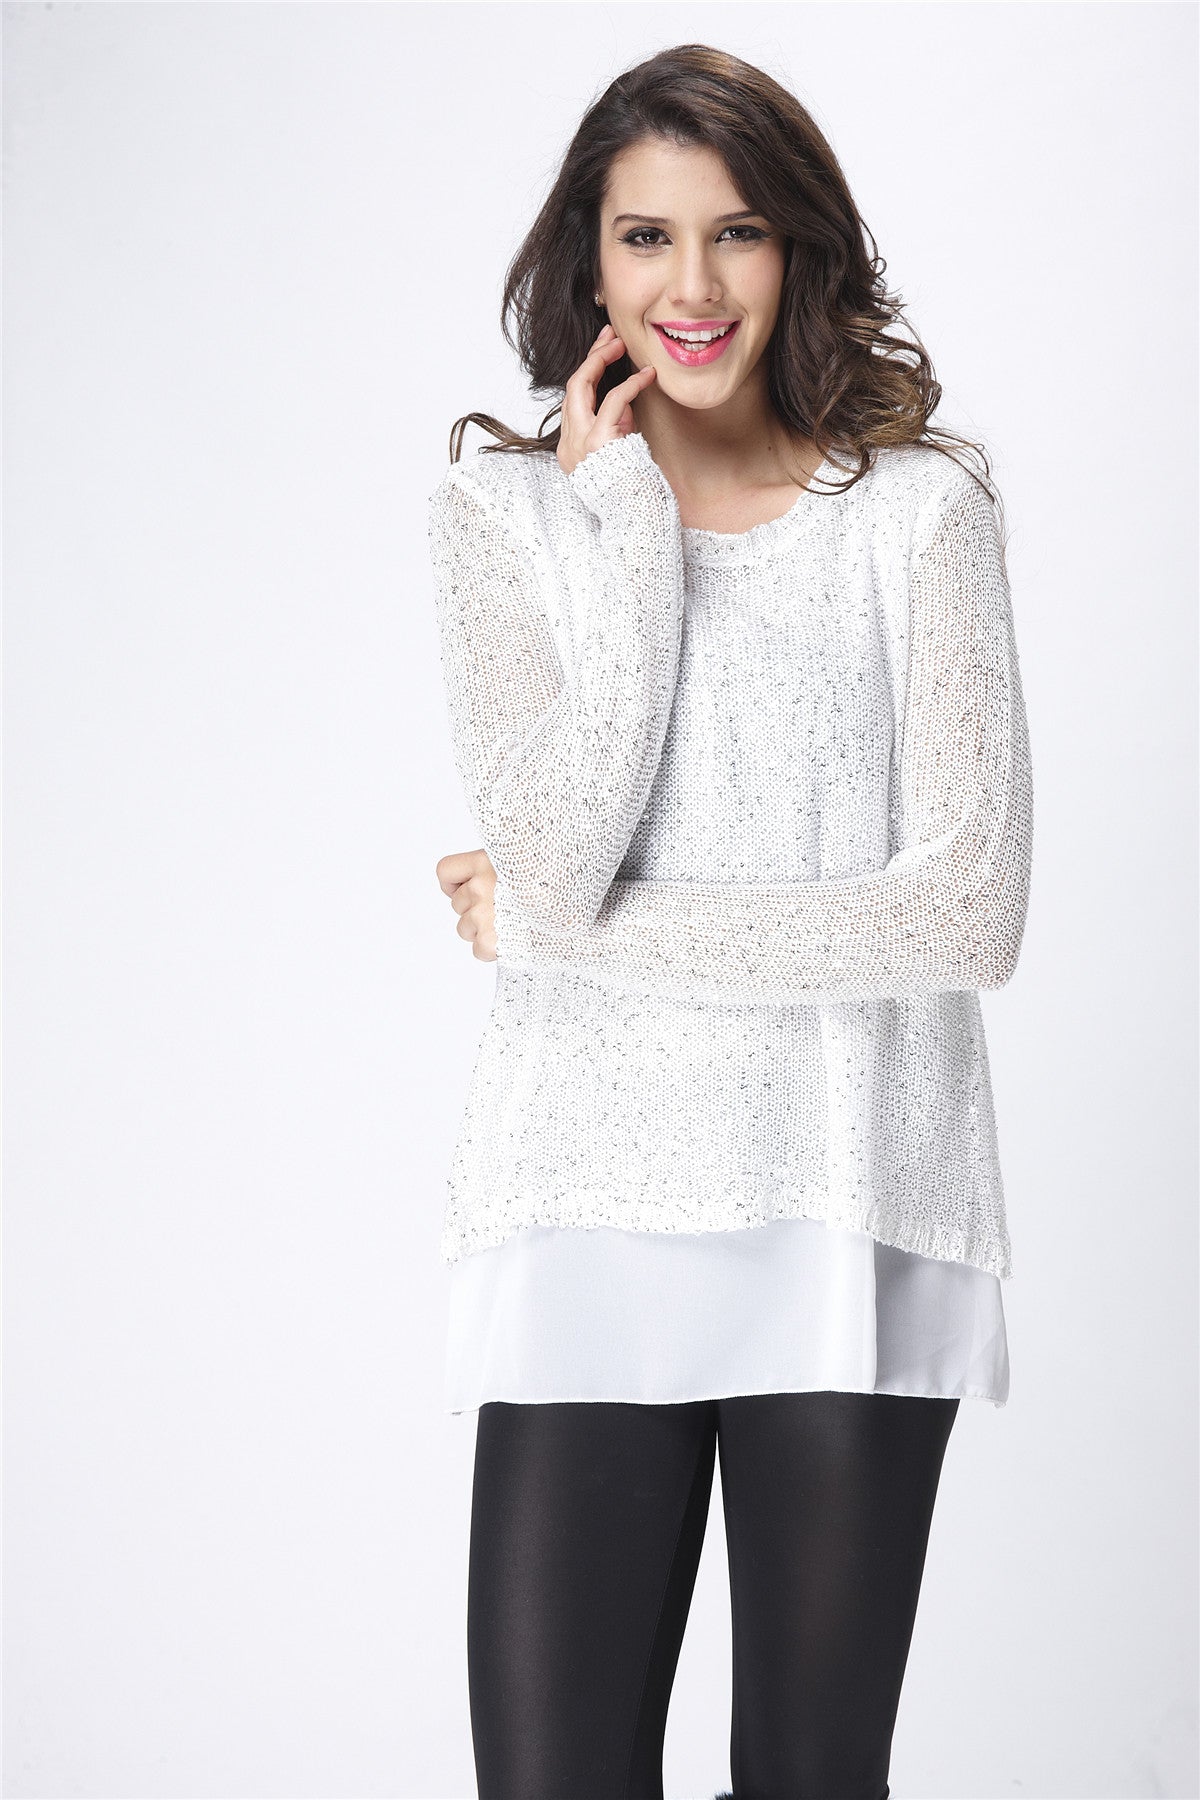 SIMPLY COUTURE Women's Plus Size Casual Sequin Layered Tunic with Bows ...